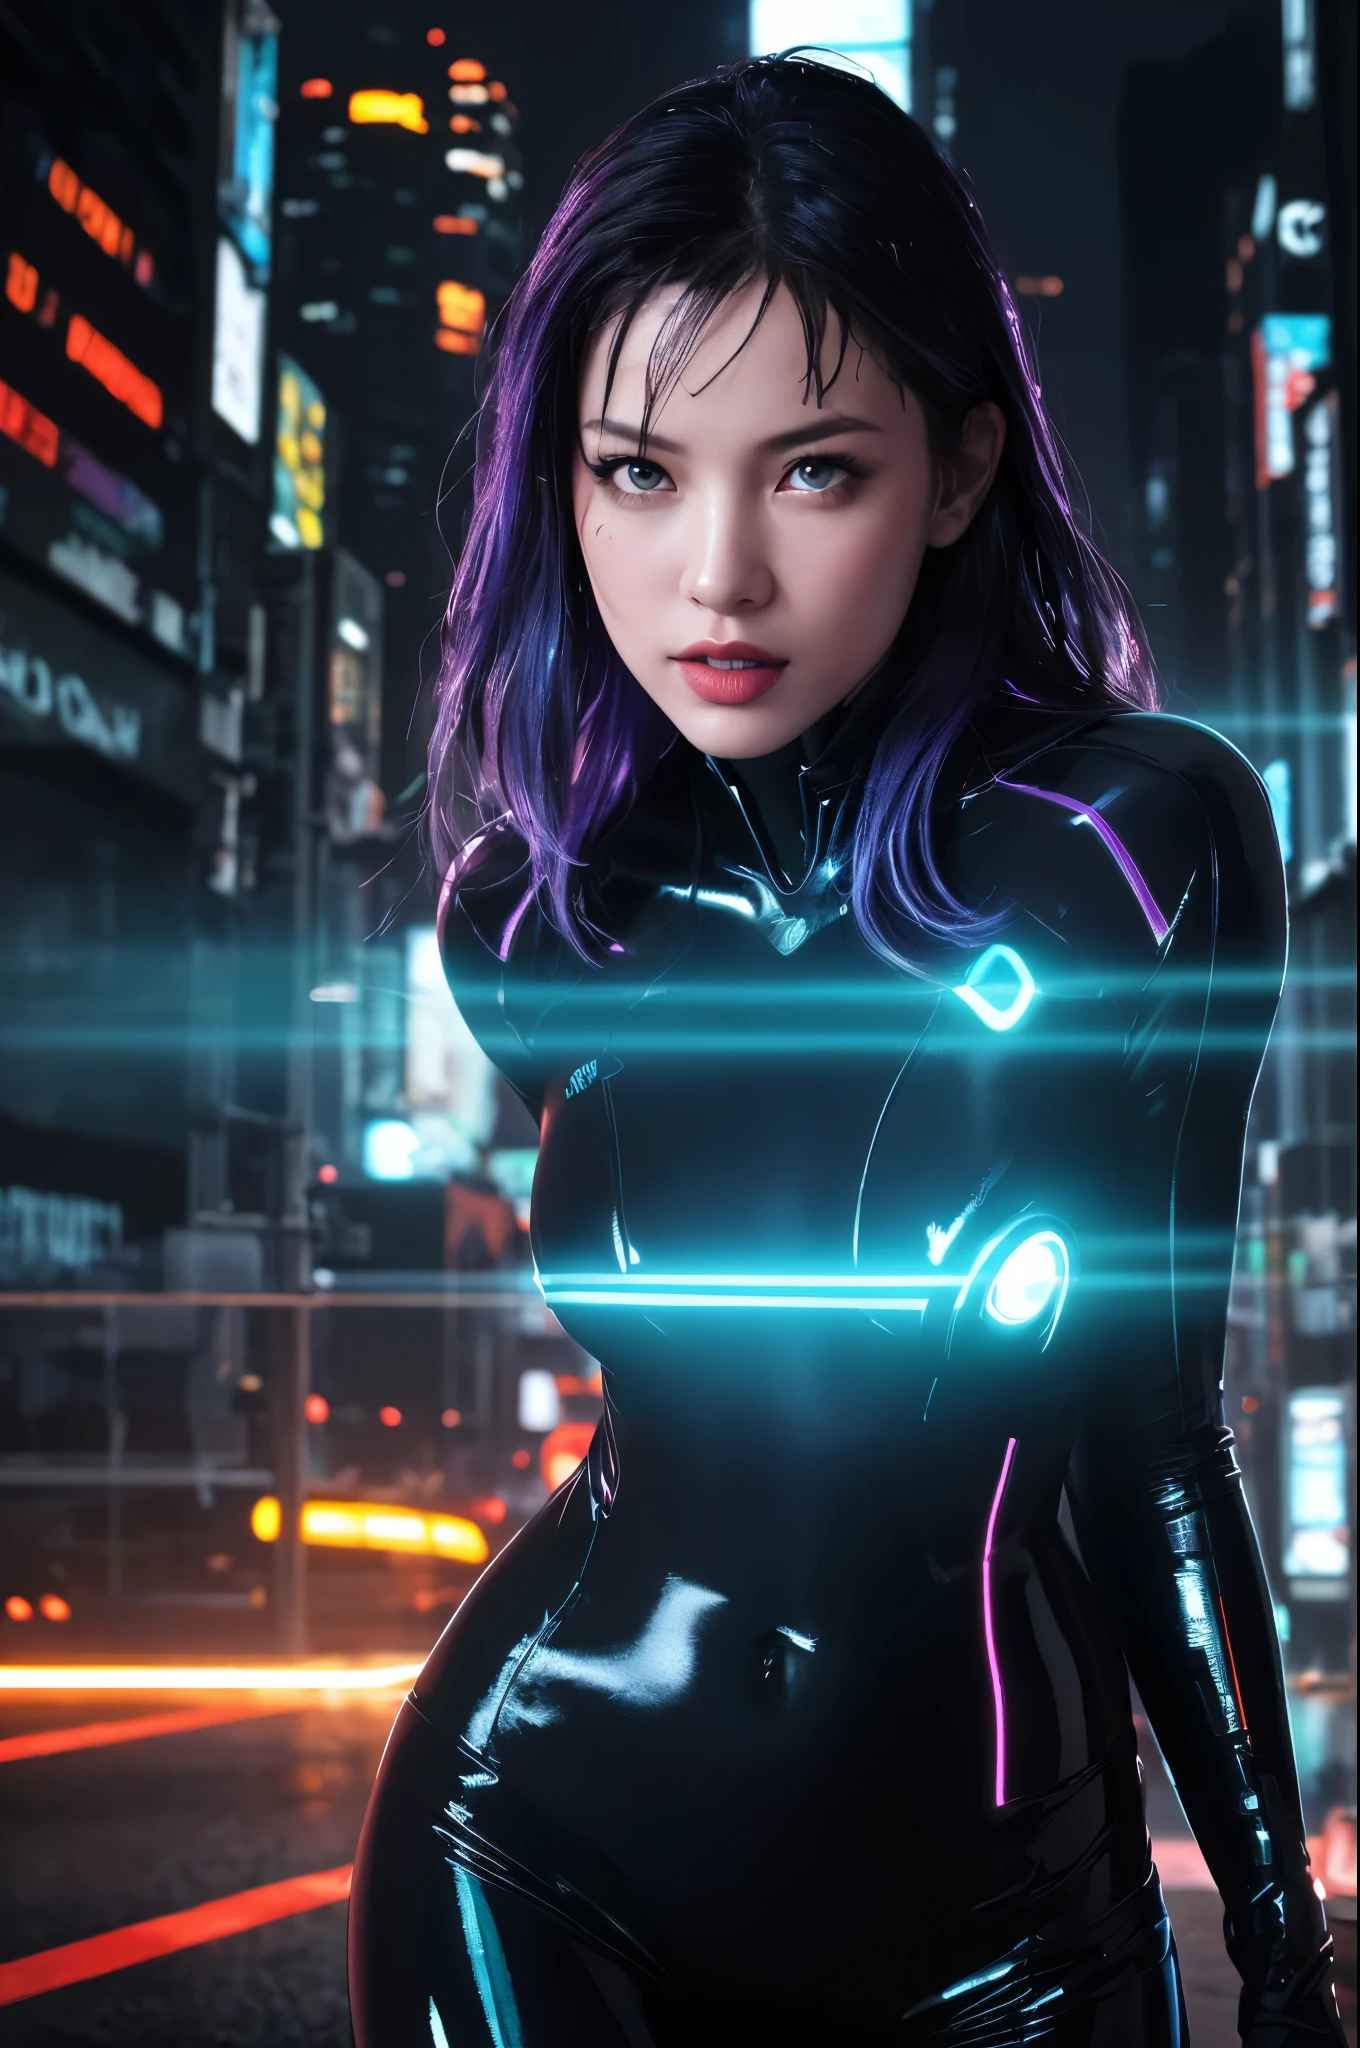 
(best quality, highres:1.2), ultra-detailed, (realistic:1.37) A sexy tron girl, vibrant holographic colors, with glowing lines tracing her curves. (futuristic, cyberpunk) vibe, light projections highlighting her sleek metallic suit, (electric blue) and (neon purple) illuminating her luminous figure. She confidently strikes (strong, fierce, powerful) fighting poses, showcasing her agility and strength. (bright, sharp) eyes pierce through the darkness, (sparkling, mesmerizing) with intensity and determination. Her (luscious, glossy) lips, radiating a (subtle, seductive) smile, hint at her playful yet fierce nature. The background is a (dystopian, futuristic) cityscape filled with towering skyscrapers, (reflecting off the wet streets, adorned with holographic billboards) casting an (eerie, vibrant) glow. Strategically positioned (light beams, spotlights), (accentuating, illuminating) her silhouette, draw attention to her captivating presence. The painting style is a mix of (digital illustration, digital painting), combining (photo-realistic) details with (stylized, sleek) elements. The entire scene bathes in a (cool, neon) color palette, with (bright, contrasting) hues adding depth and interest. The lighting is (dynamic, dramatic), casting (shadows, highlights) that bring depth and dimension to the tron girl and the surroundings.